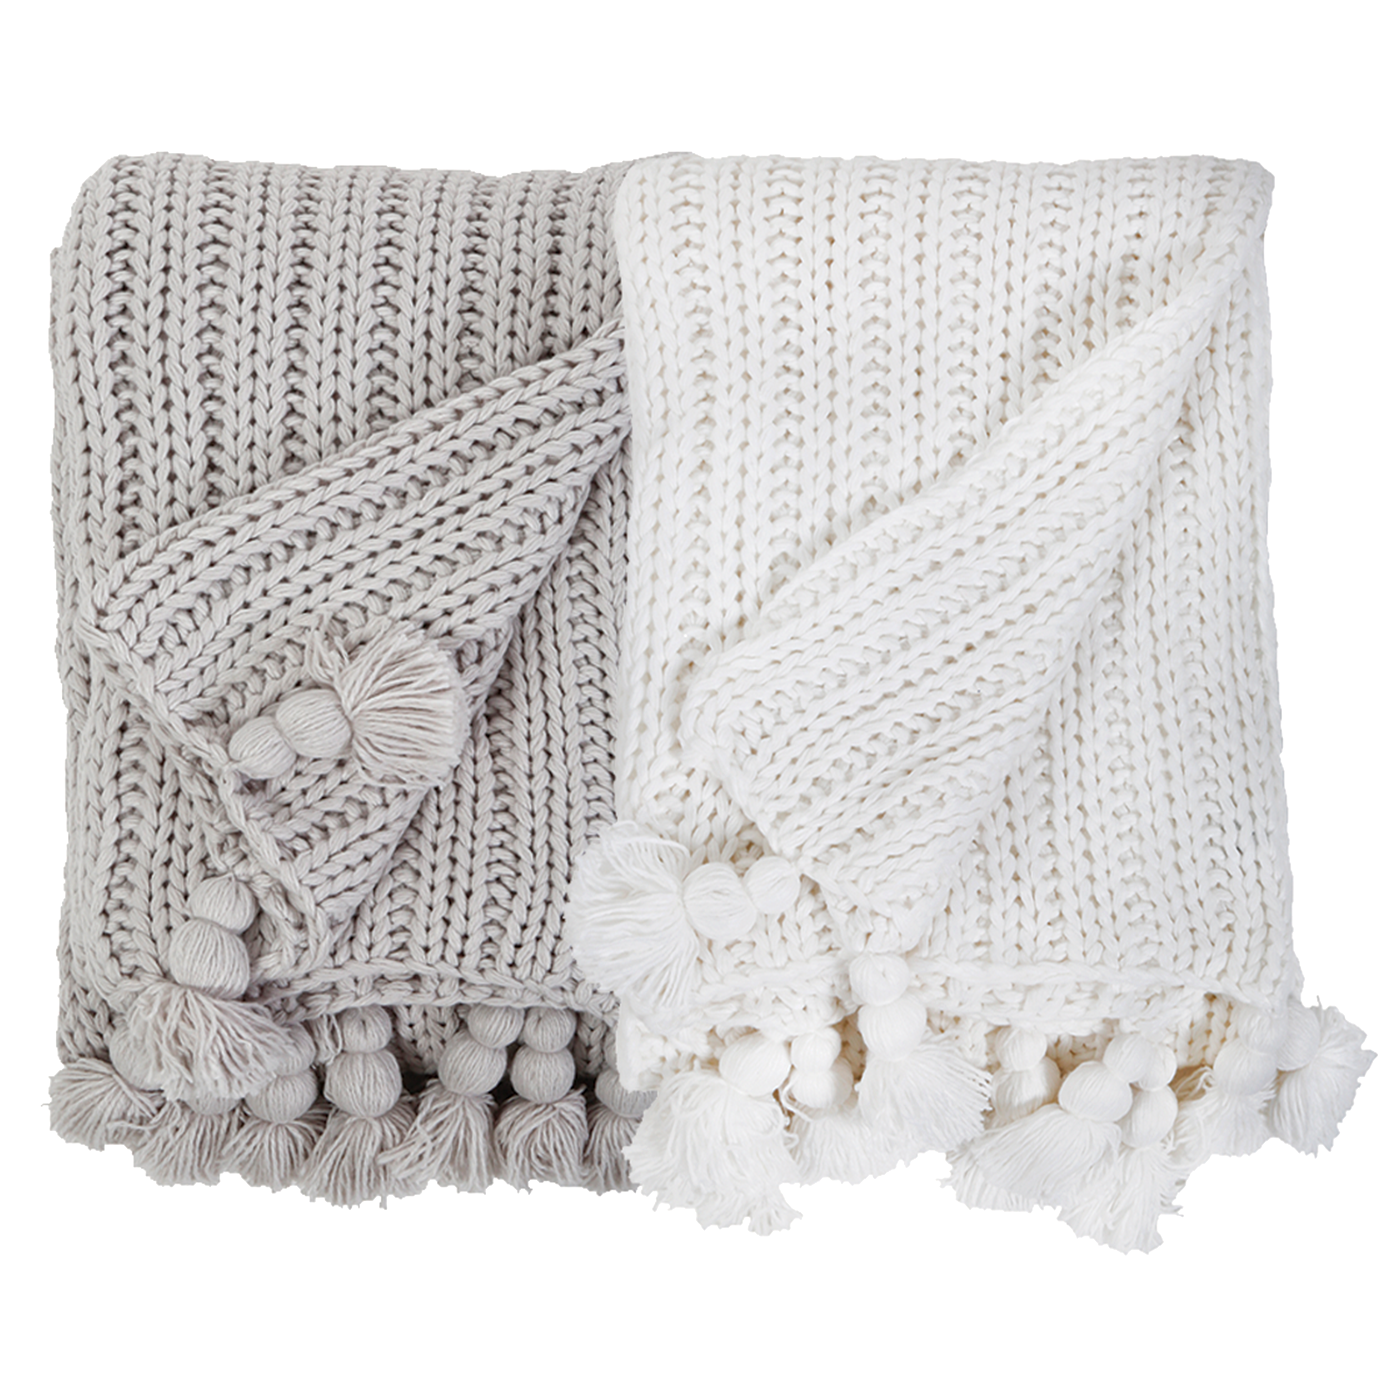 This Anacapa Oversized Throw - 2 Colors by Pom Pom at Home is a cozy chunky knit with giant soft pom poms. We'd love to see this styled on your bed or sofa.   Size: 60" x 90"